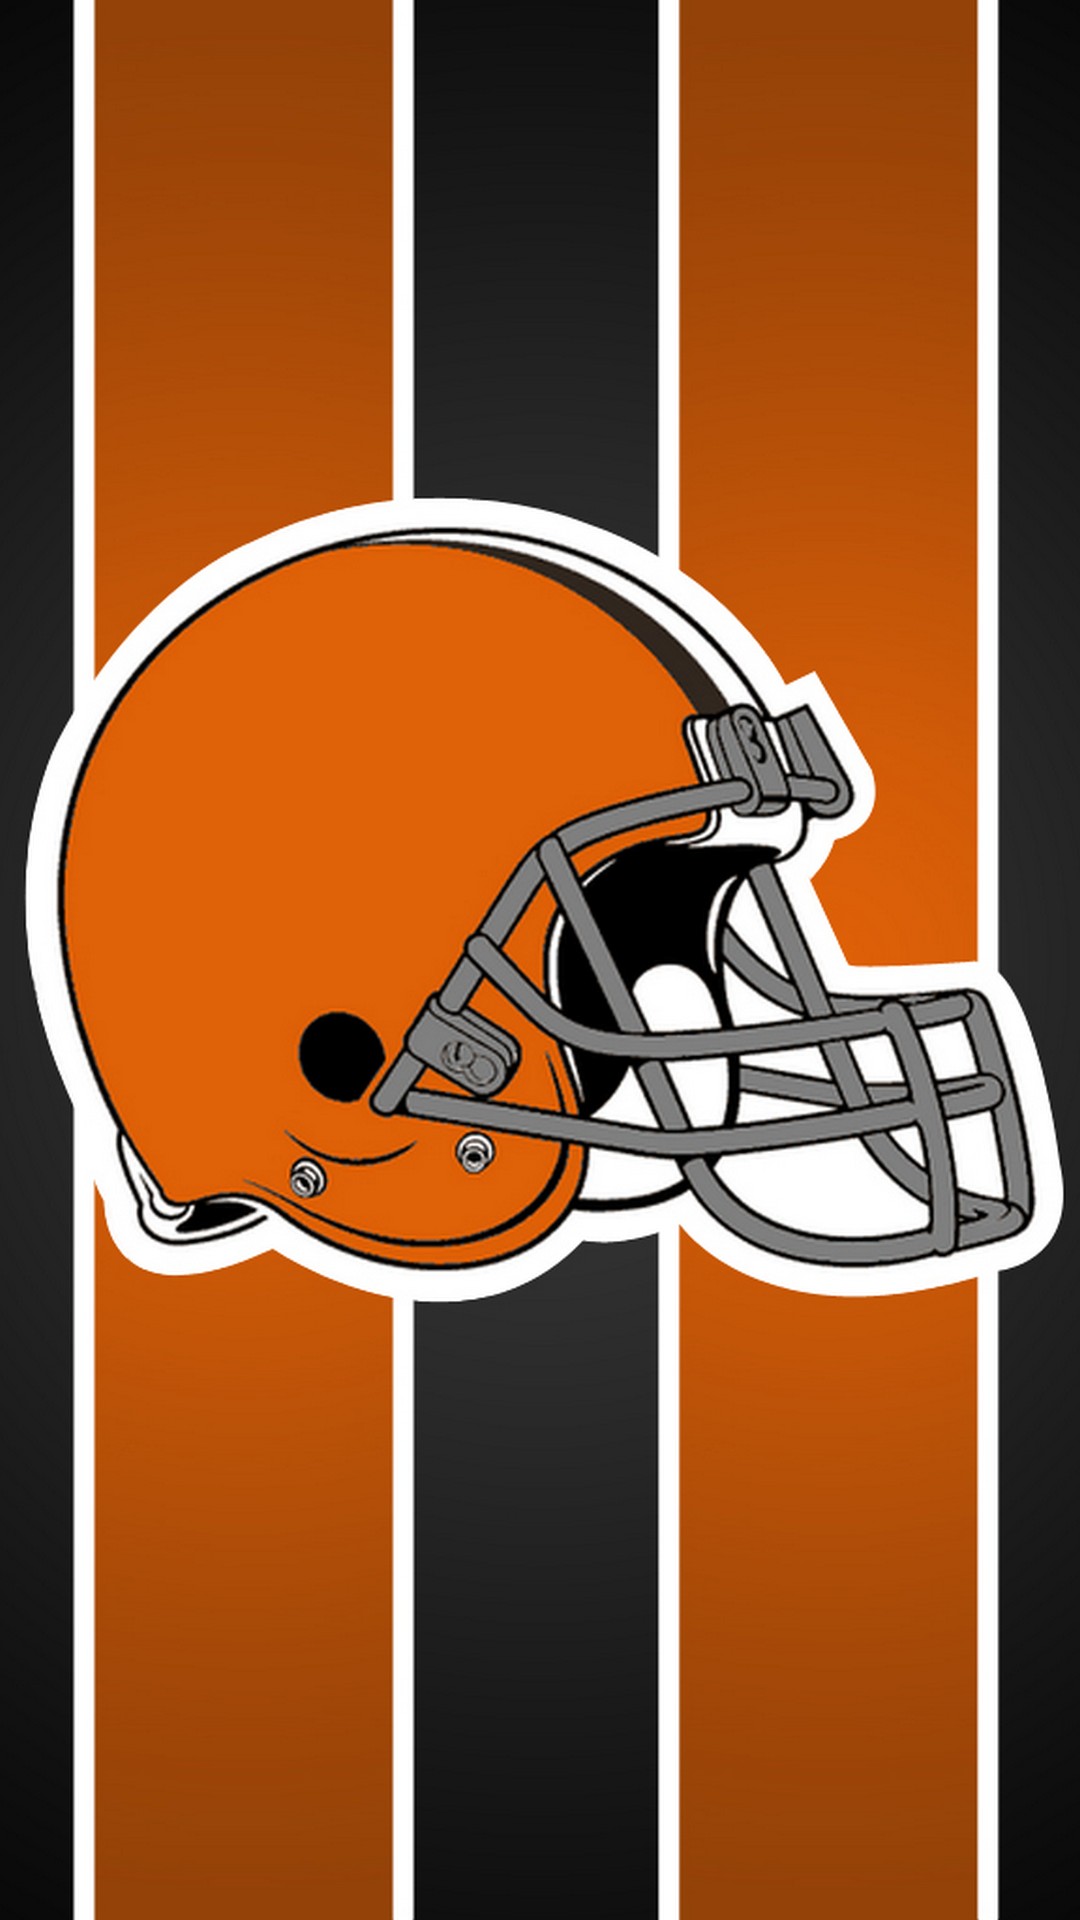 Cleveland Browns iPhone Wallpaper Lock Screen with high-resolution 1080x1920 pixel. Download and set as wallpaper for Apple iPhone X, XS Max, XR, 8, 7, 6, SE, iPad, Android